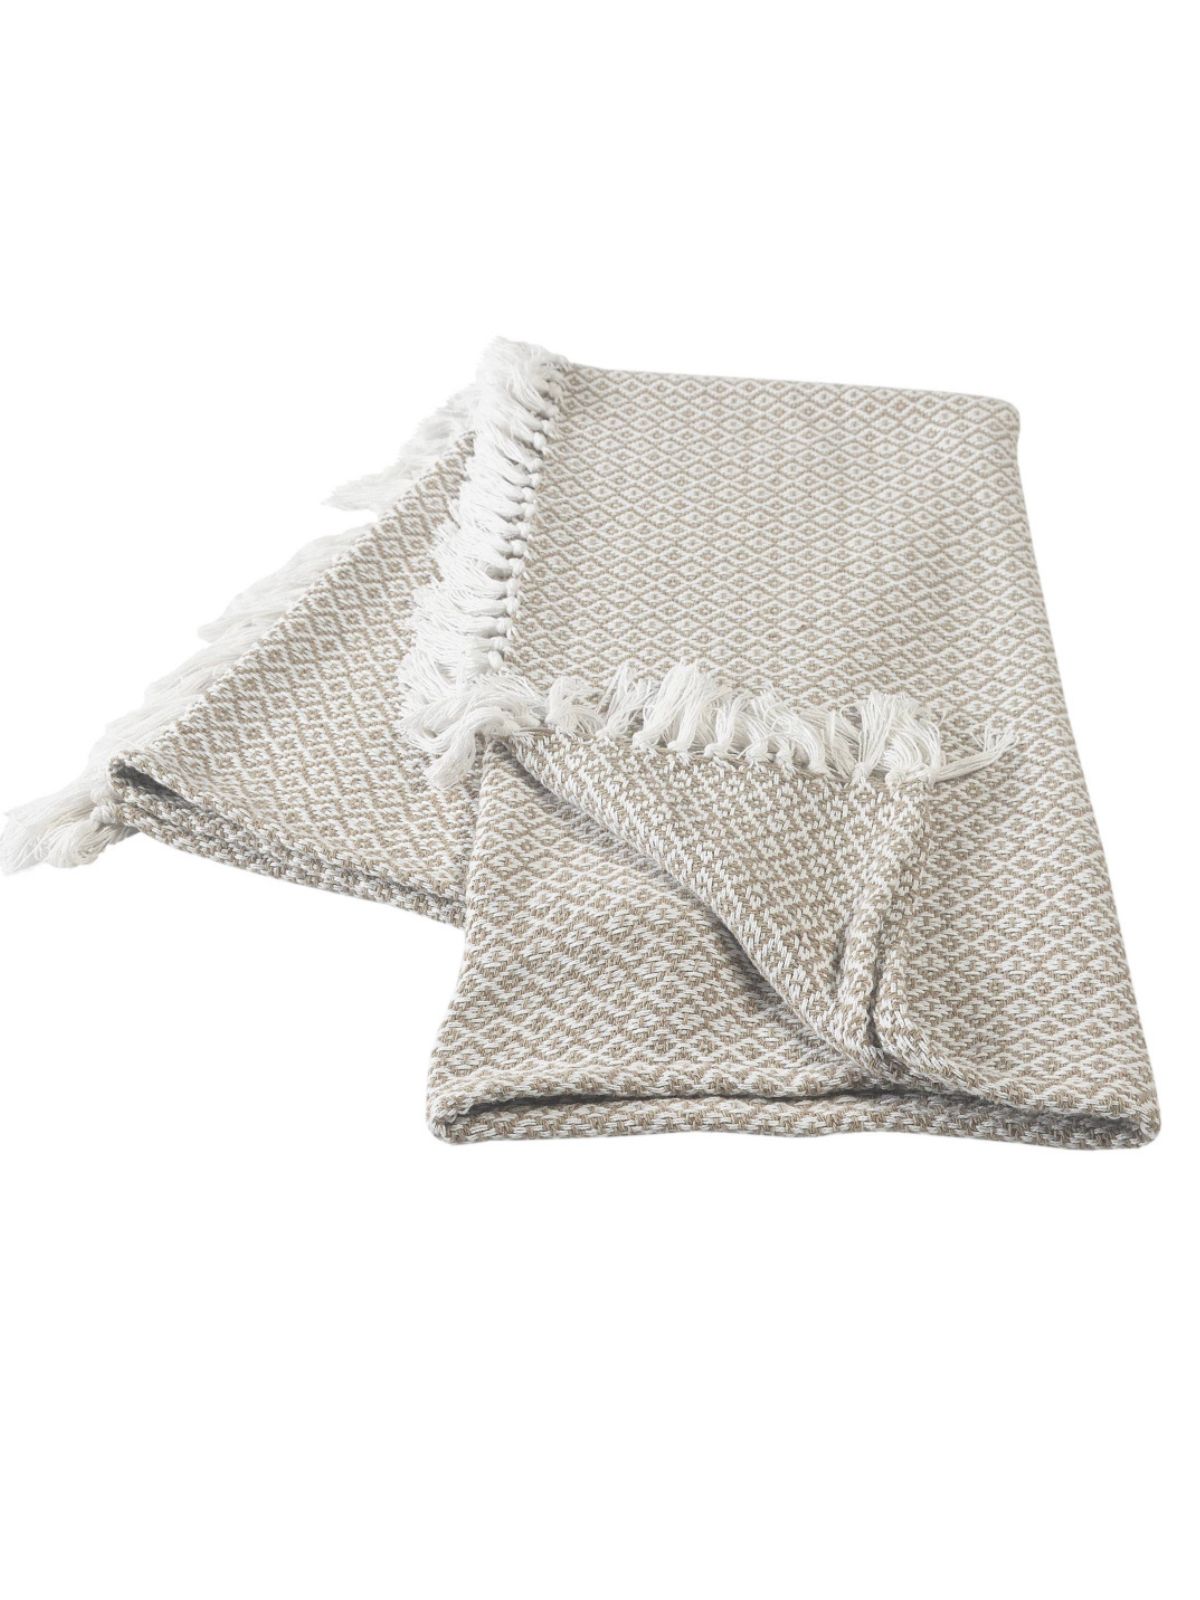 Beige and Ivory Diamond Pattern 100% Cotton Throw Blanket with Fringe, 50W x 60L. 